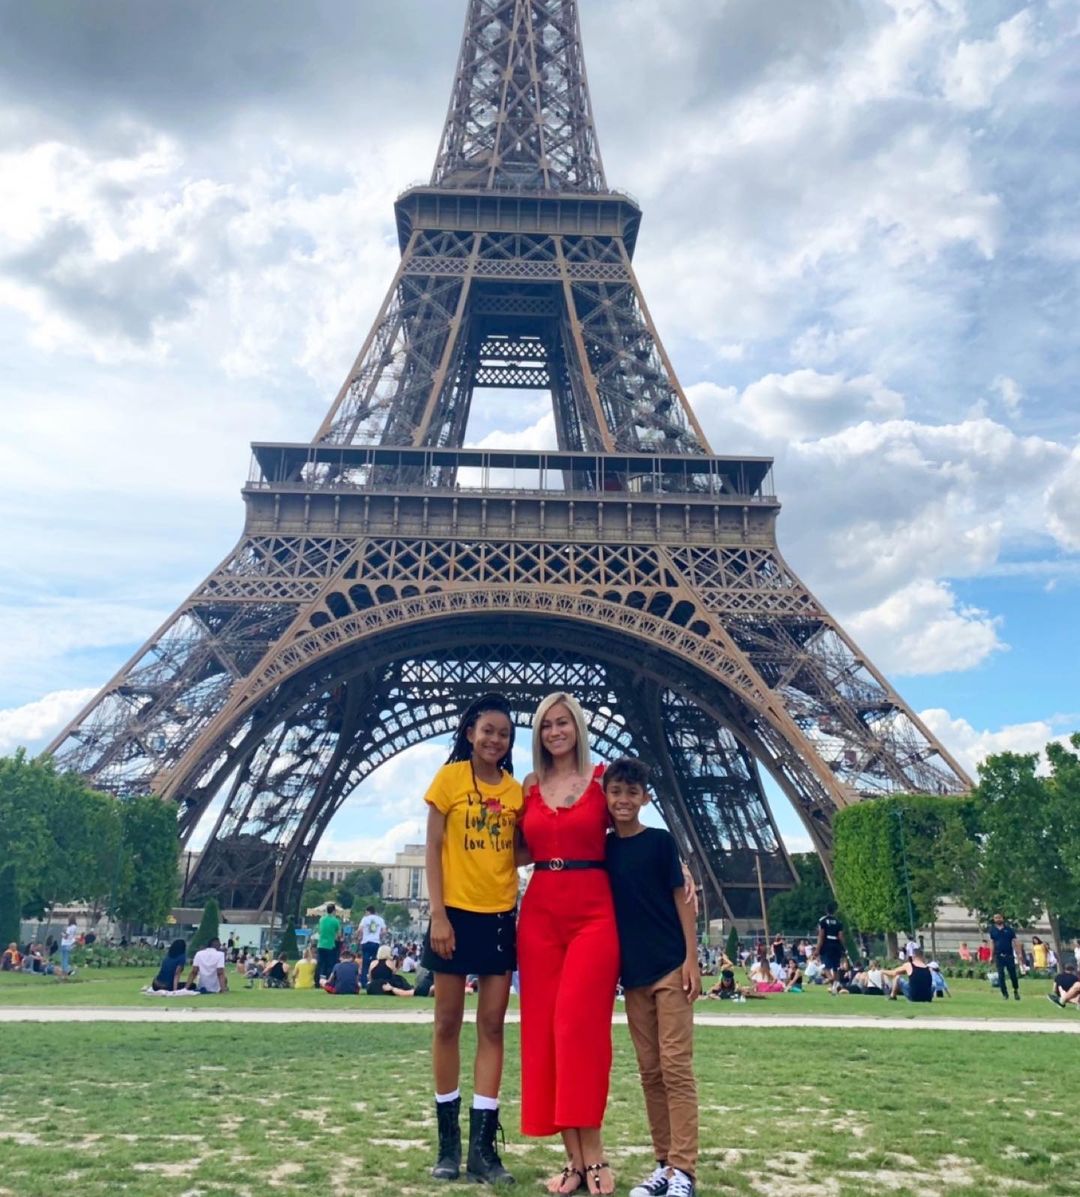 They mostly travel together for vacations like this one in Paris.